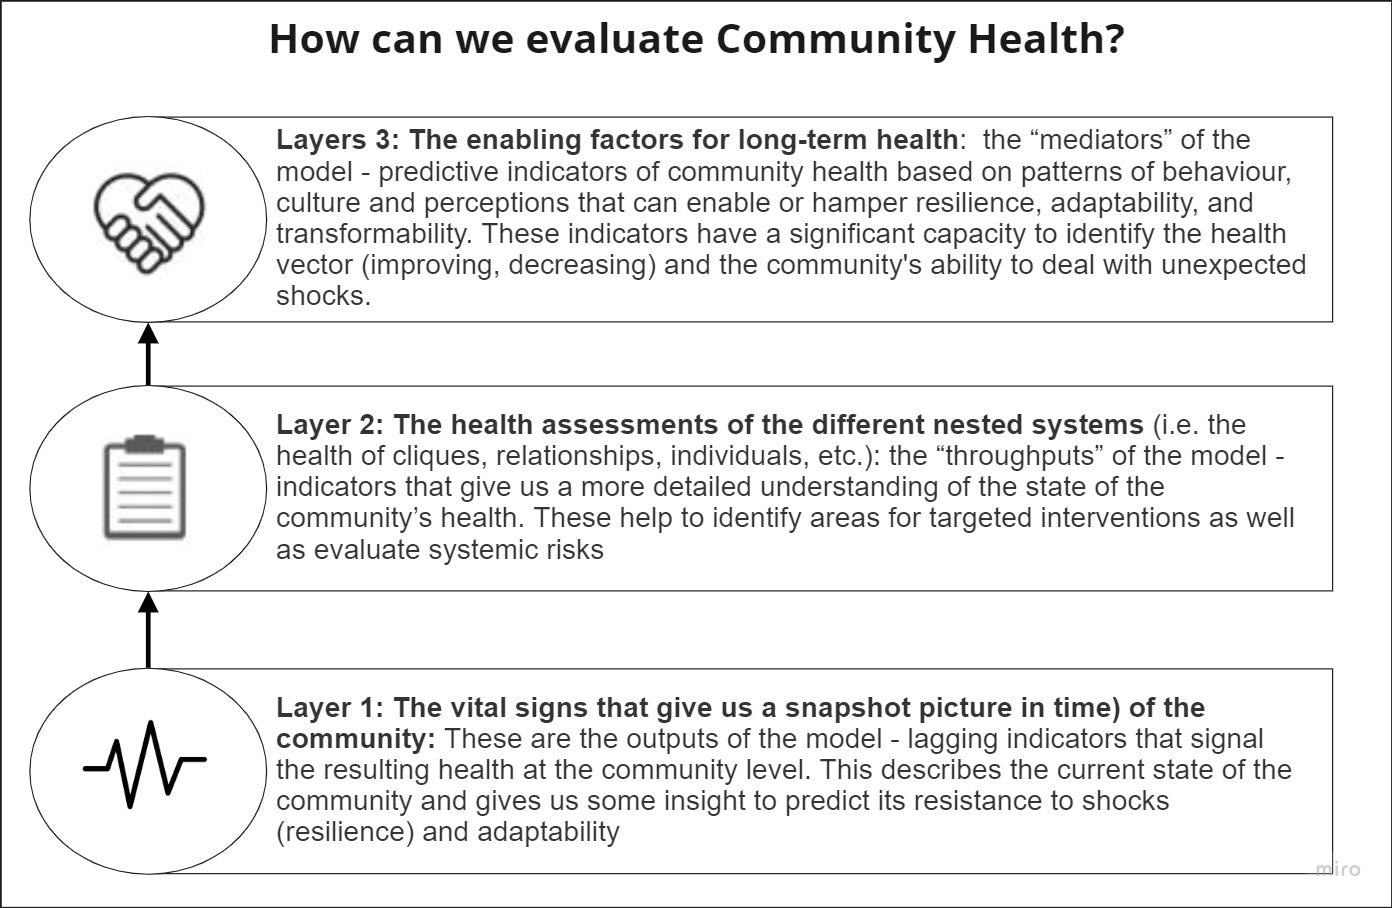 Figure 3: How we can evaluate community health